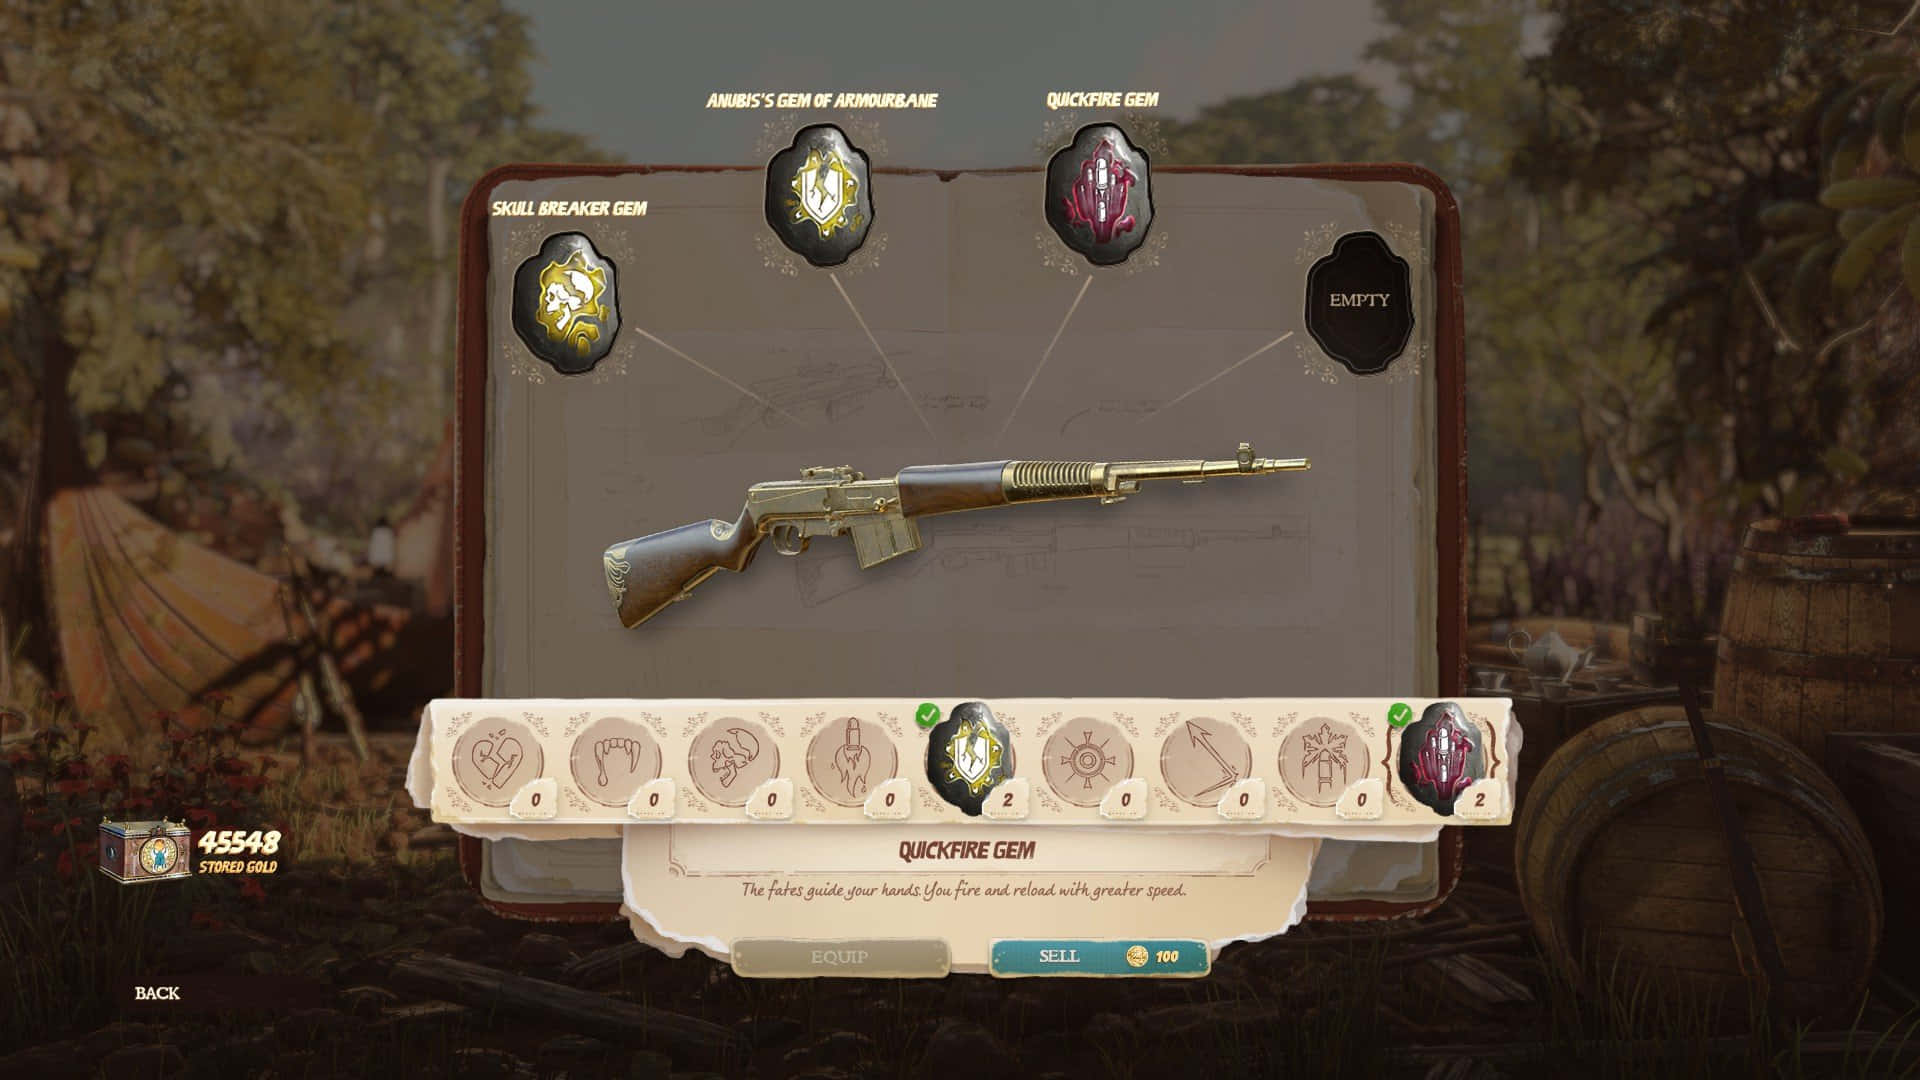 A Screenshot Of The Game With A Gun And Other Items